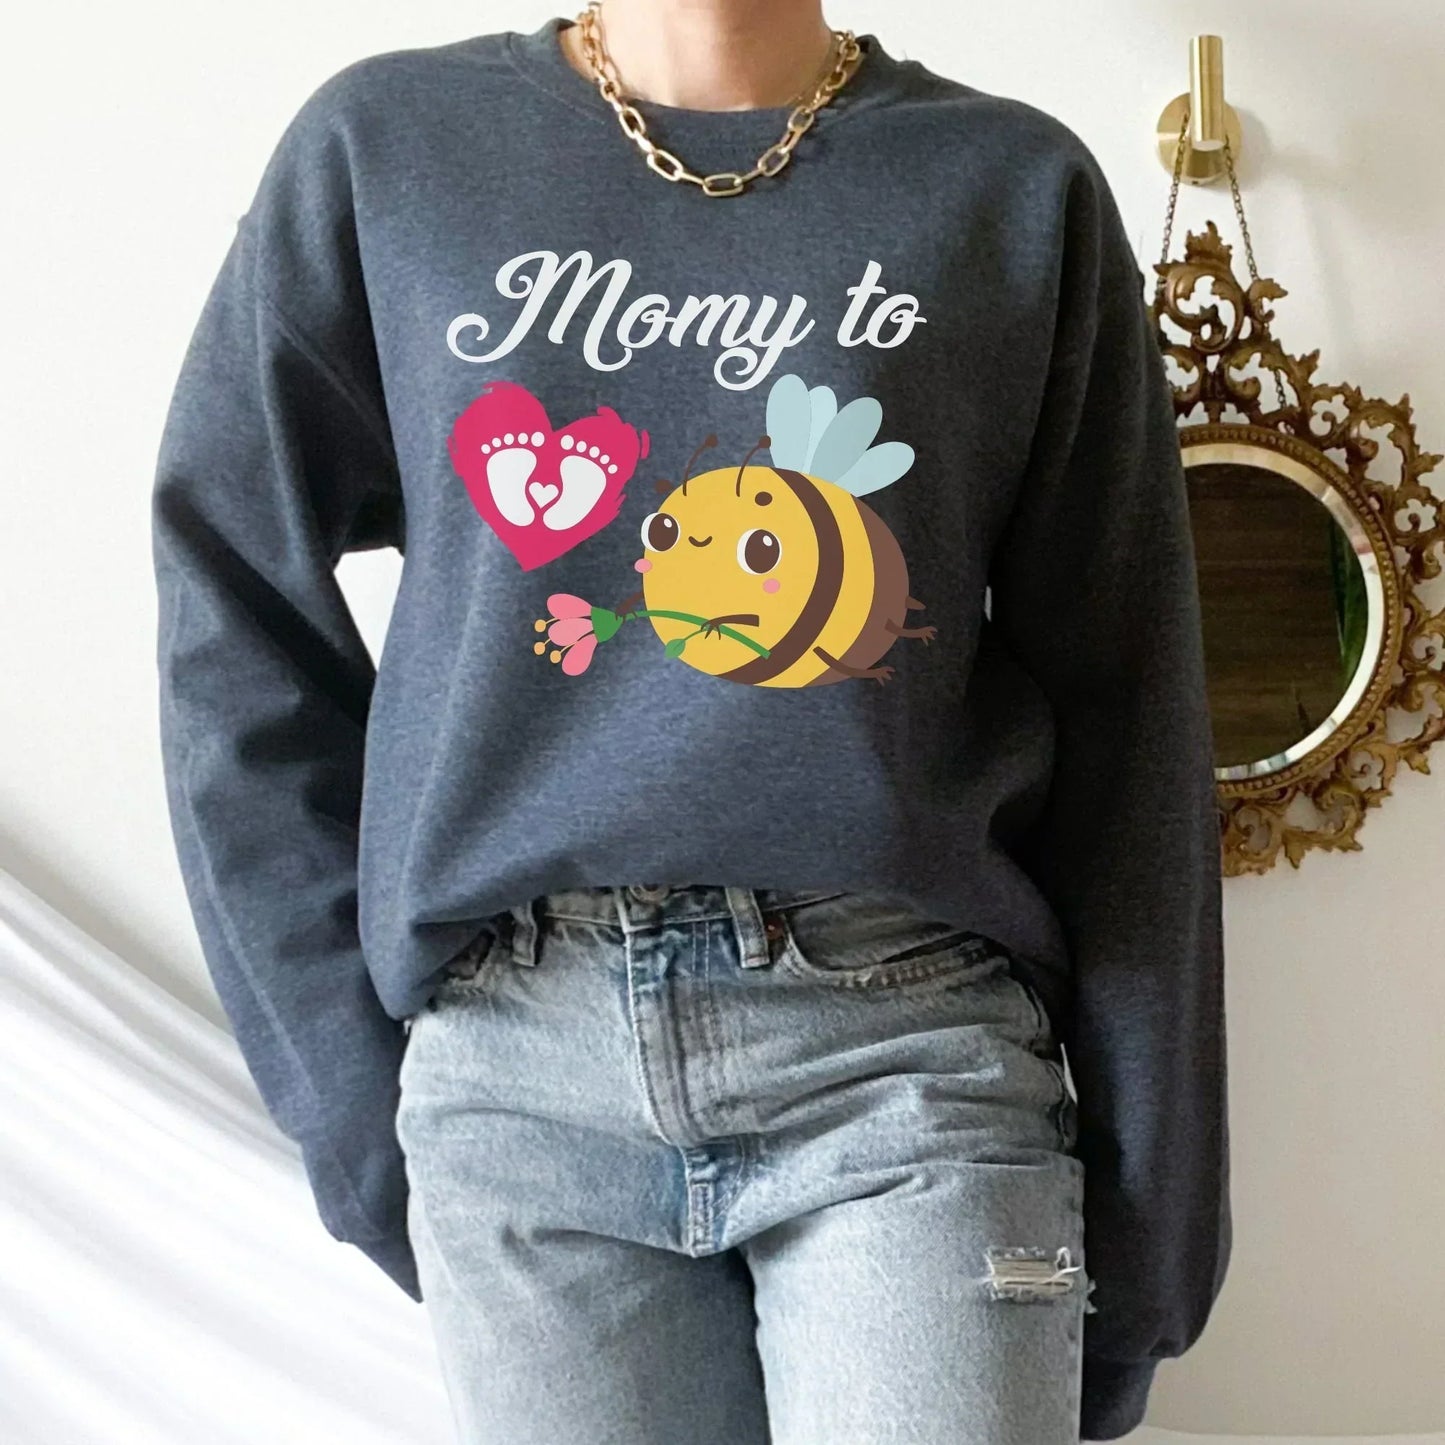 Pregnancy sweatshirt, Maternity shirt, Bumble Bee Pregnancy Reveal to Husband, Soon to Be Mom, Expecting Mother Hoodie, New Baby Coming Soon